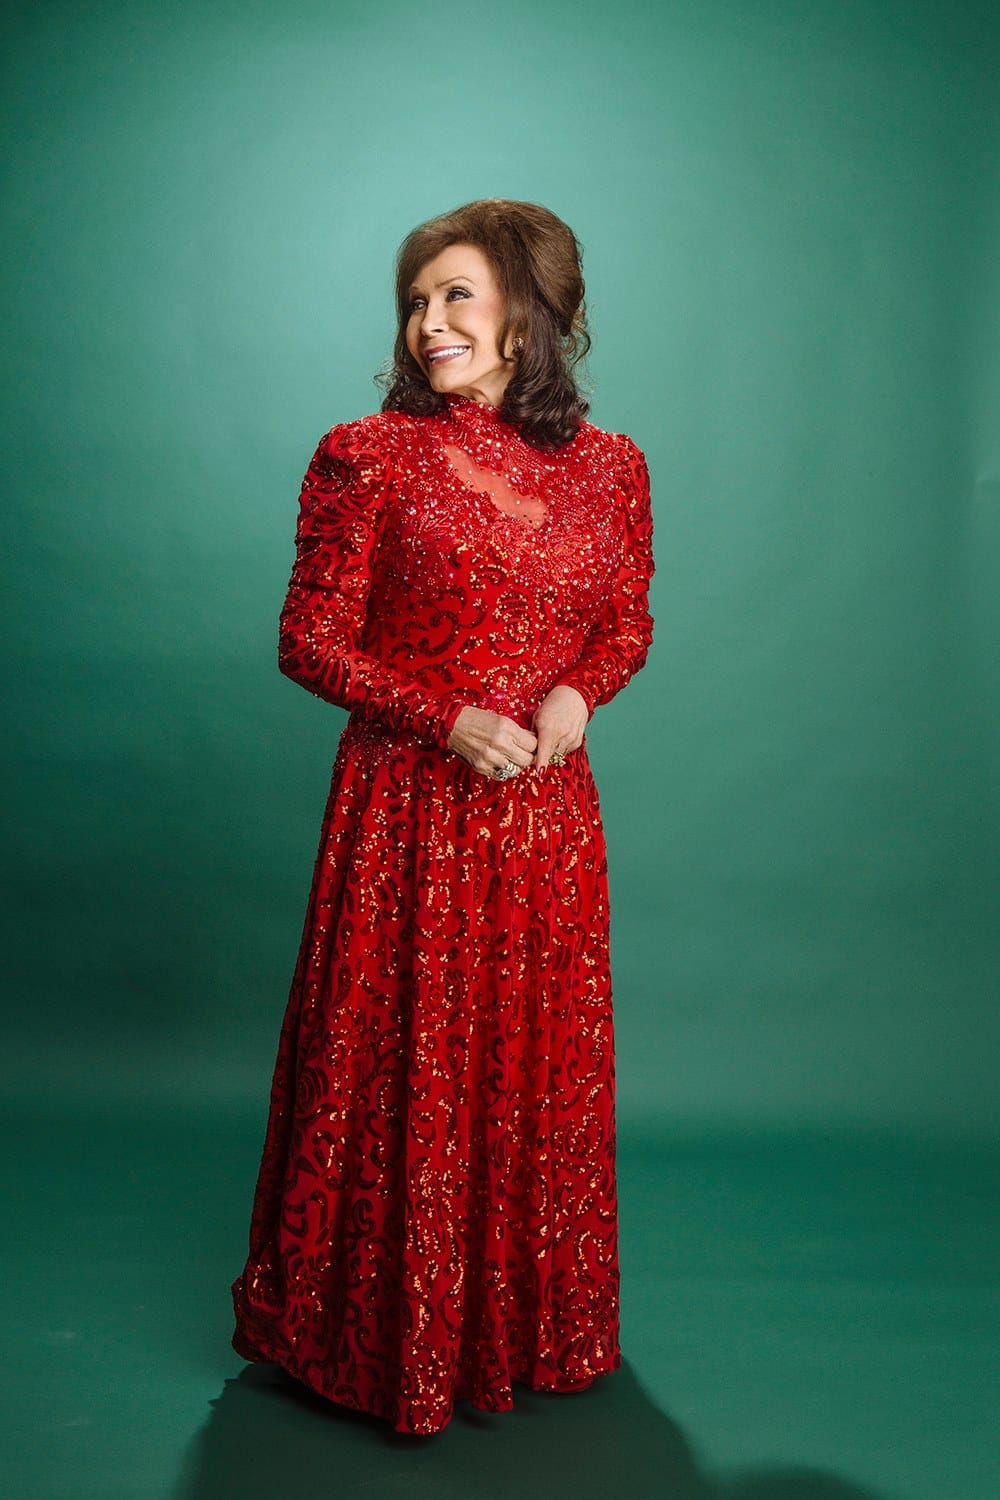 Loretta Lynn in a promotional photo for her 2016 Christmas album "White Christmas Blue"